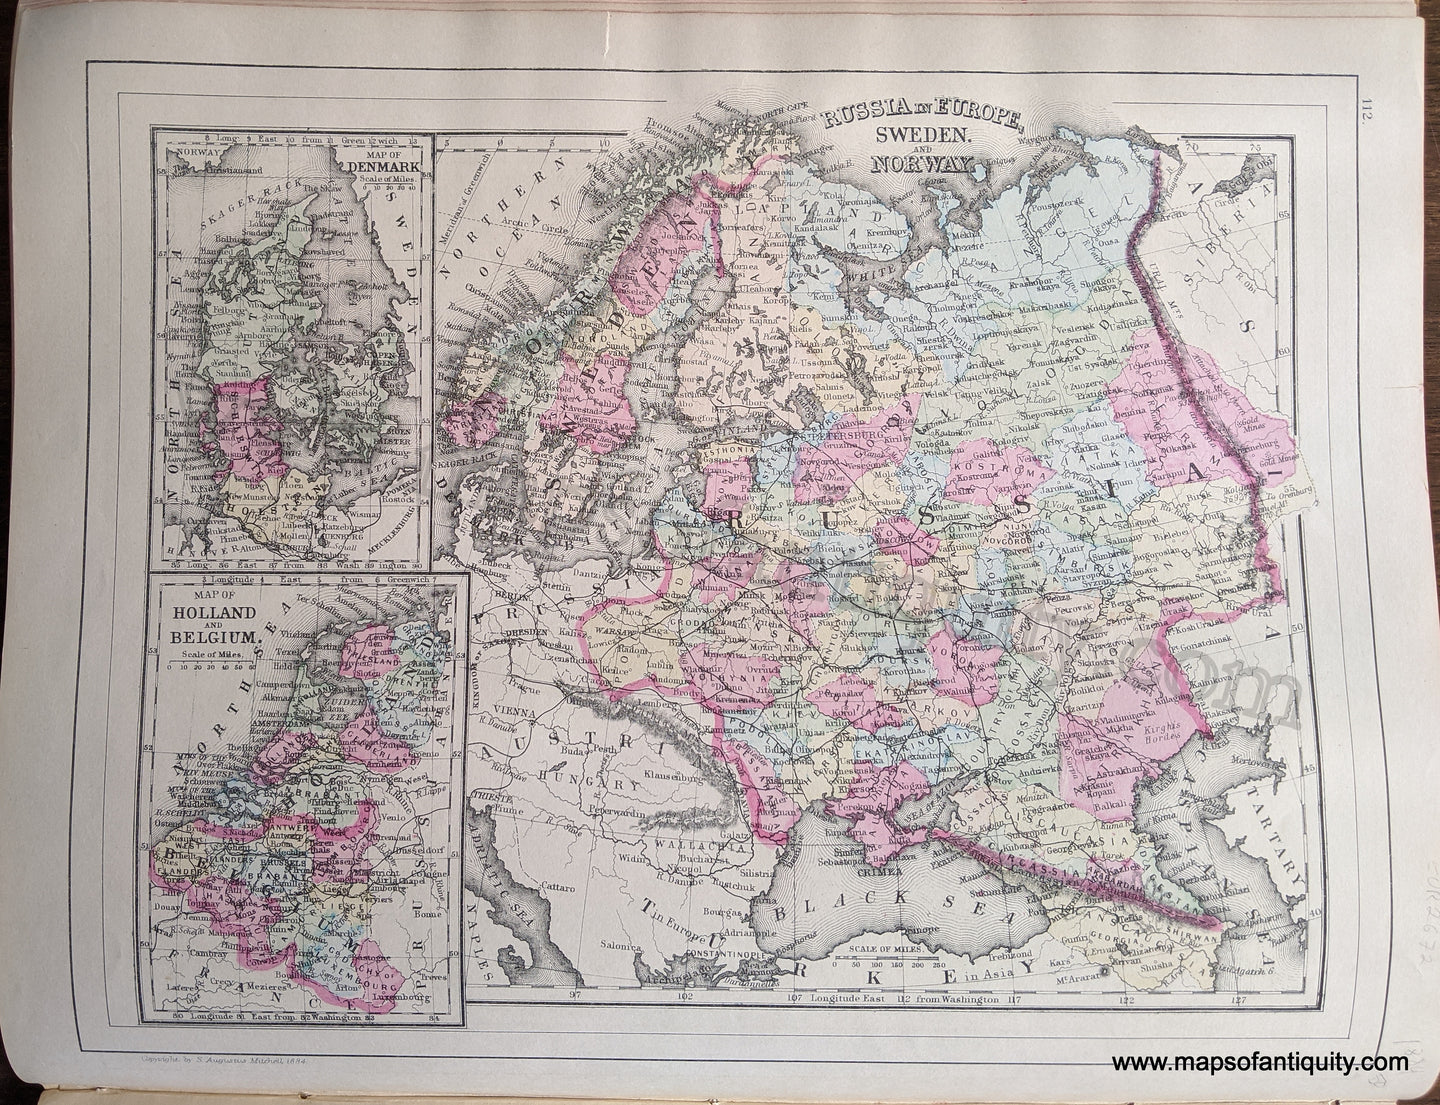 Antique-Hand-Colored-Map-Russia-in-Europe-Sweden-and-Norway-/-Map-of-Denmark-/-Map-of-Holland-and-Belgium-Europe-Russia-1884-Mitchell-Maps-Of-Antiquity-1800s-19th-century